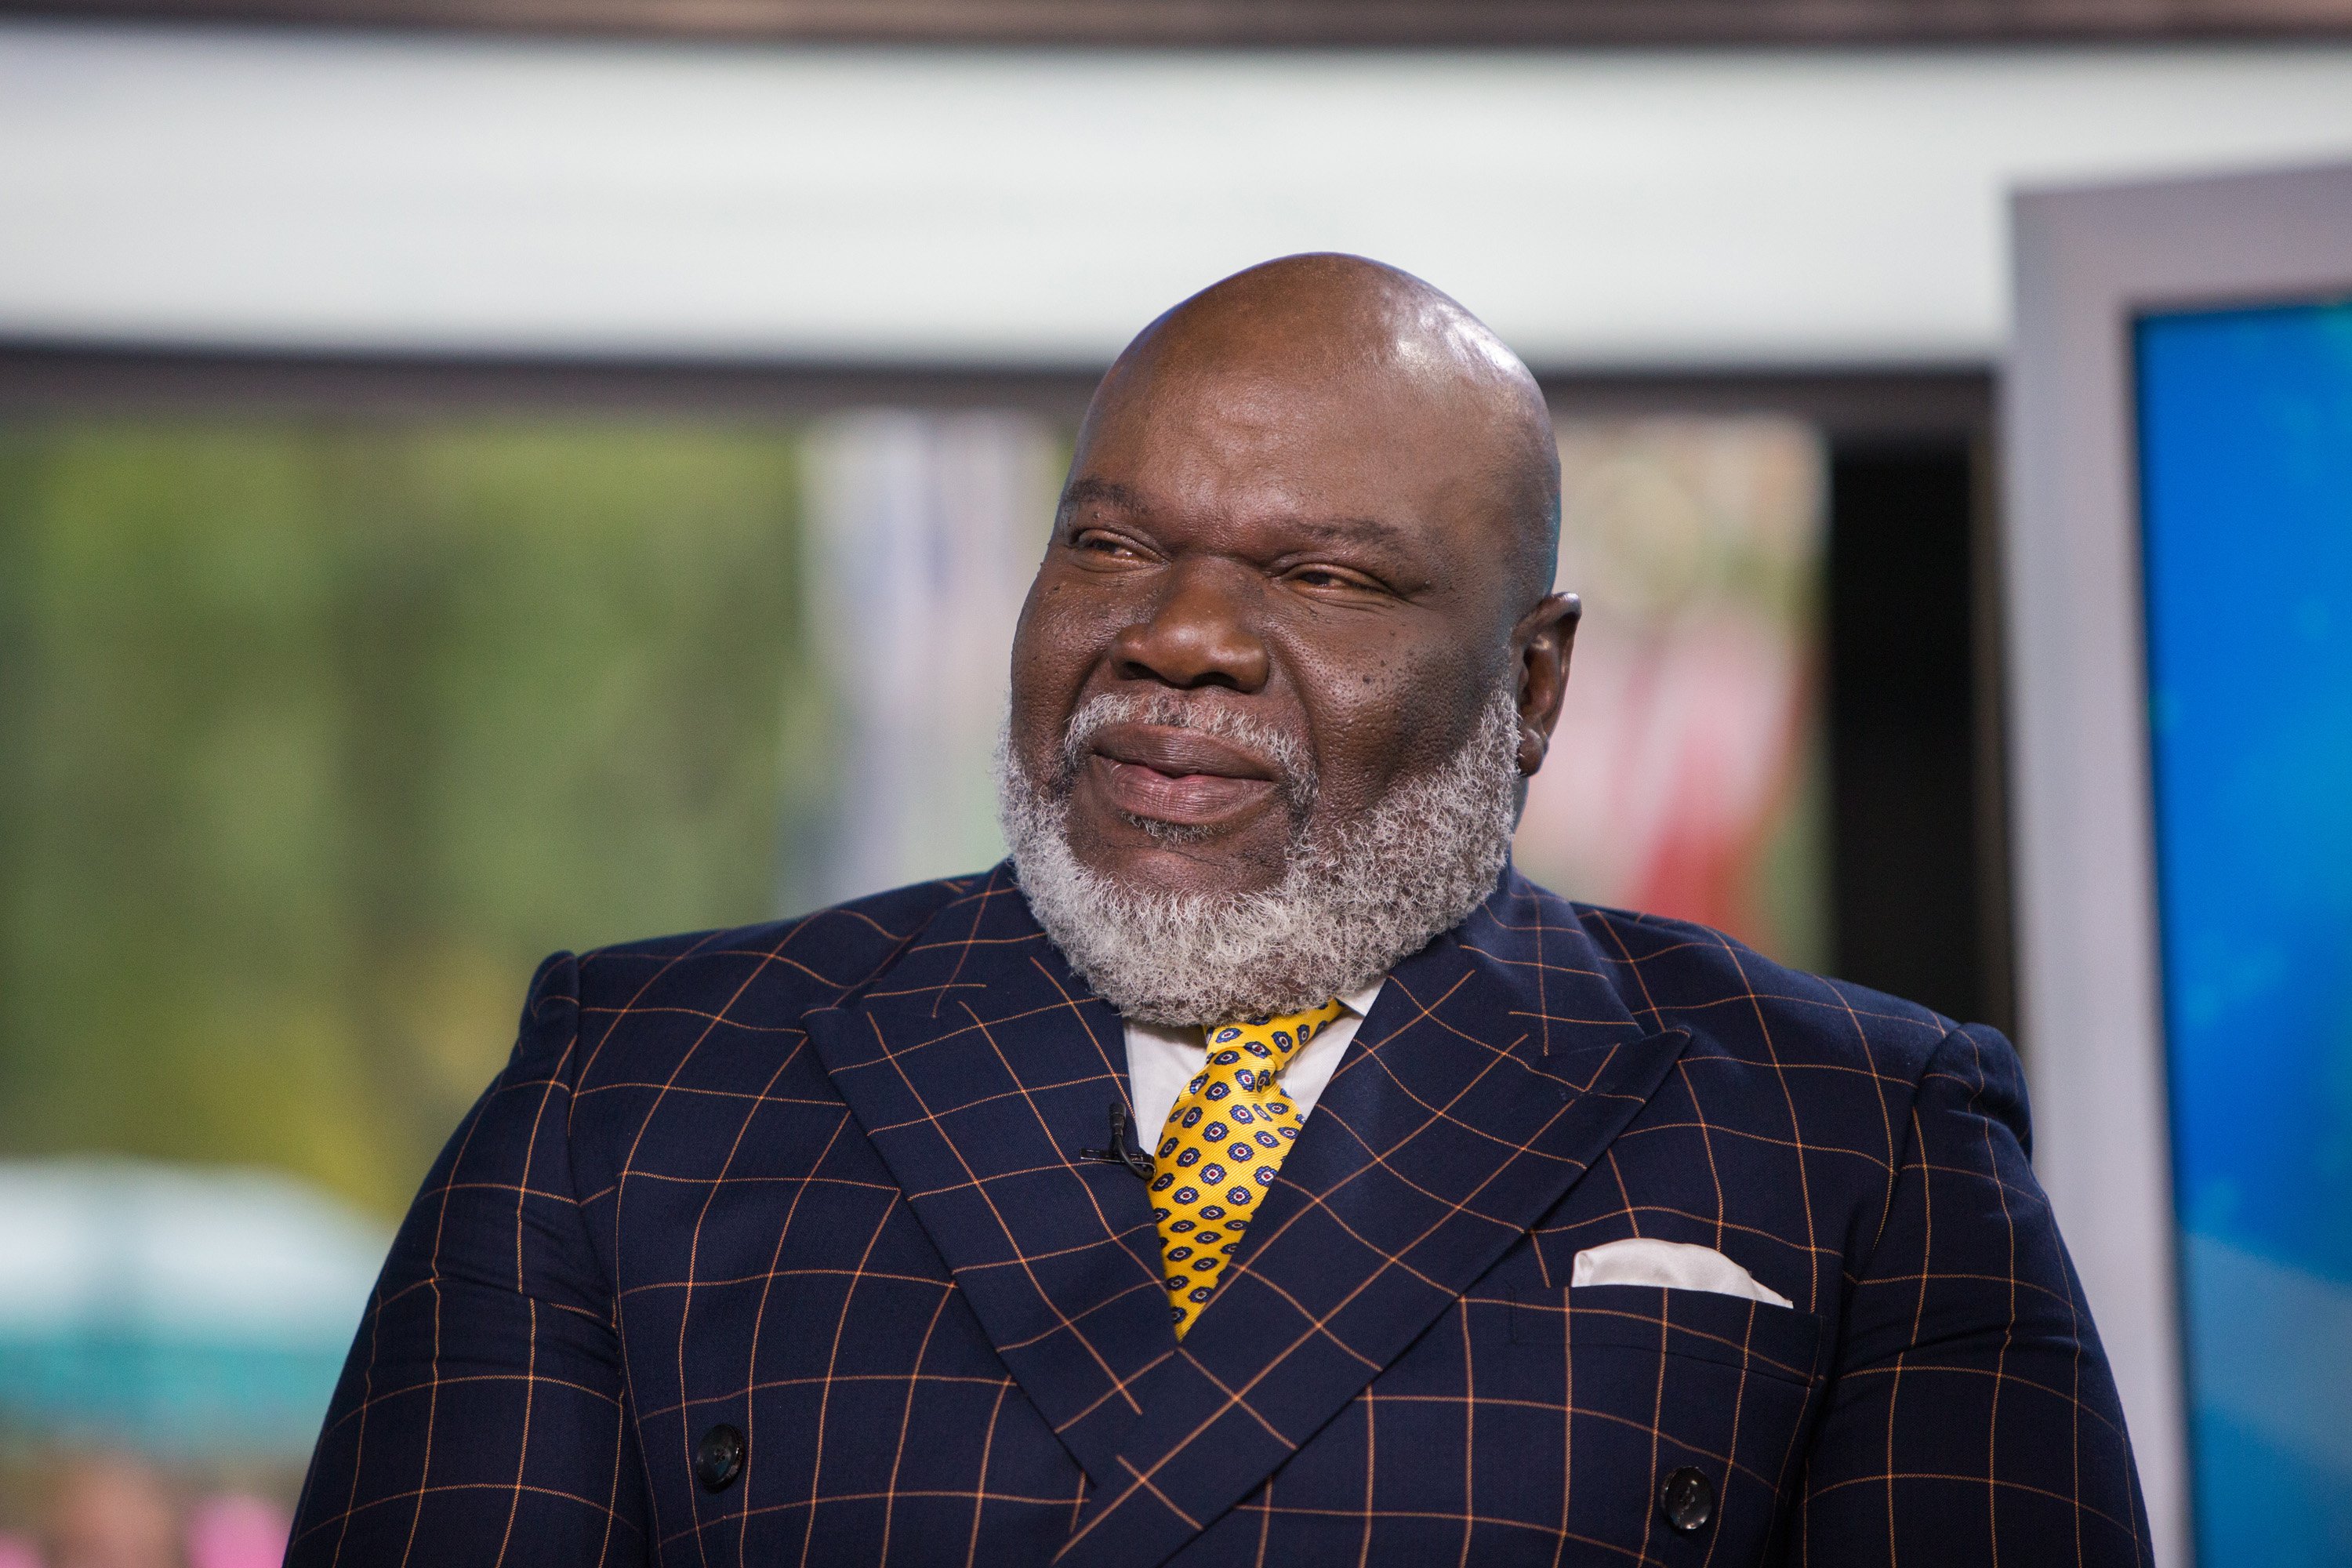 Bishop T.D. Jakes on Monday, October 9, 2017 | Source: Getty Images